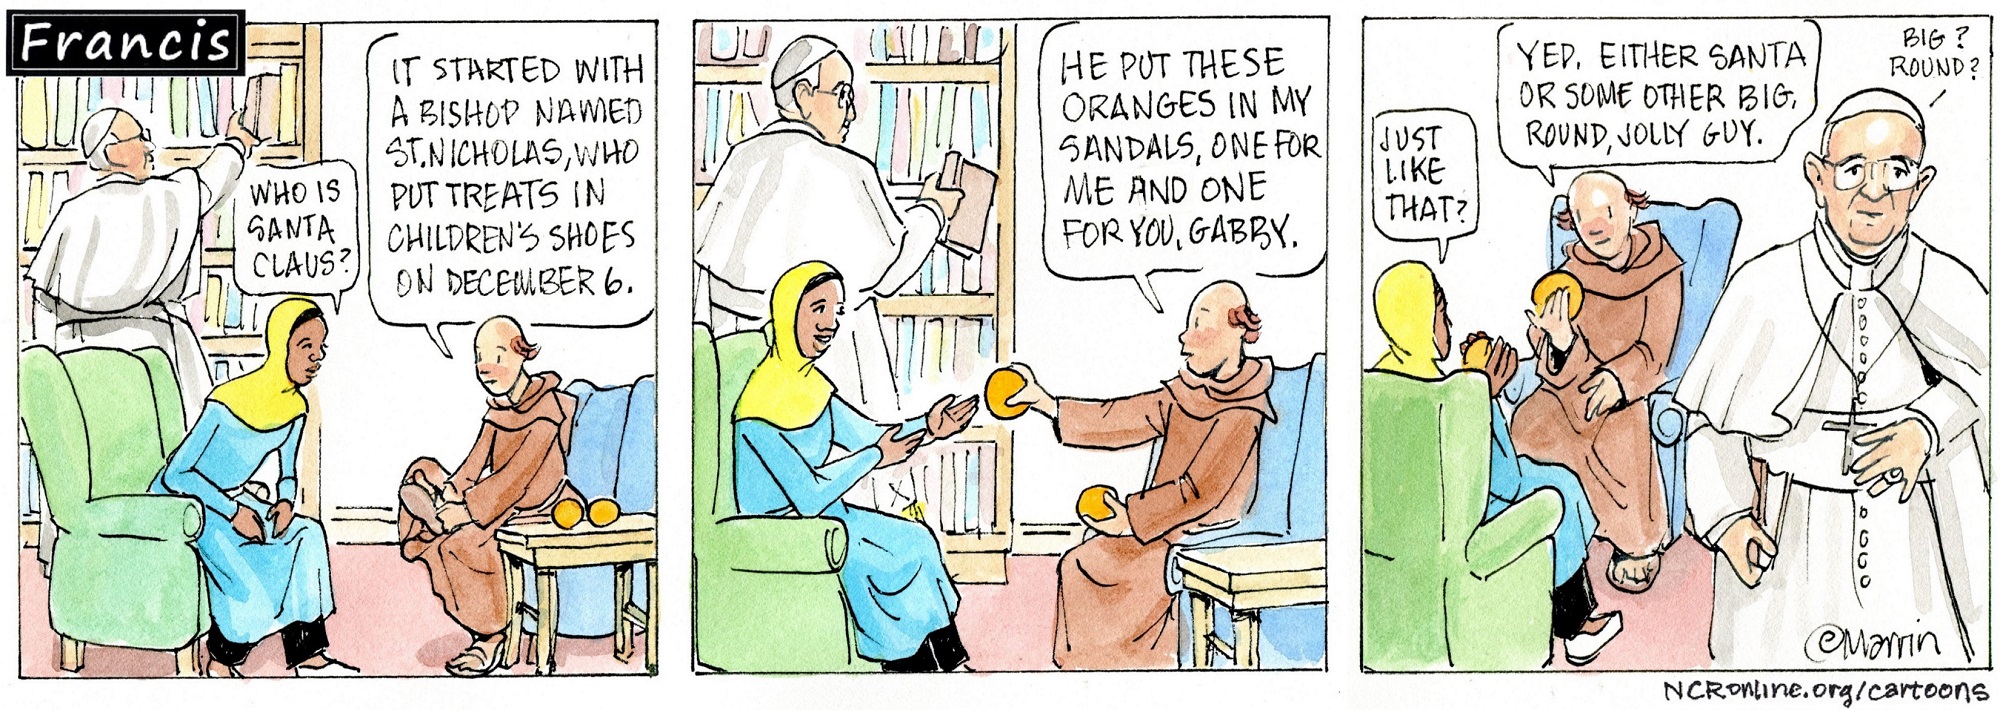 Francis, the comic strip: Brother Leo tells Gabby about St. Nicholas and the origin of Santa Claus.